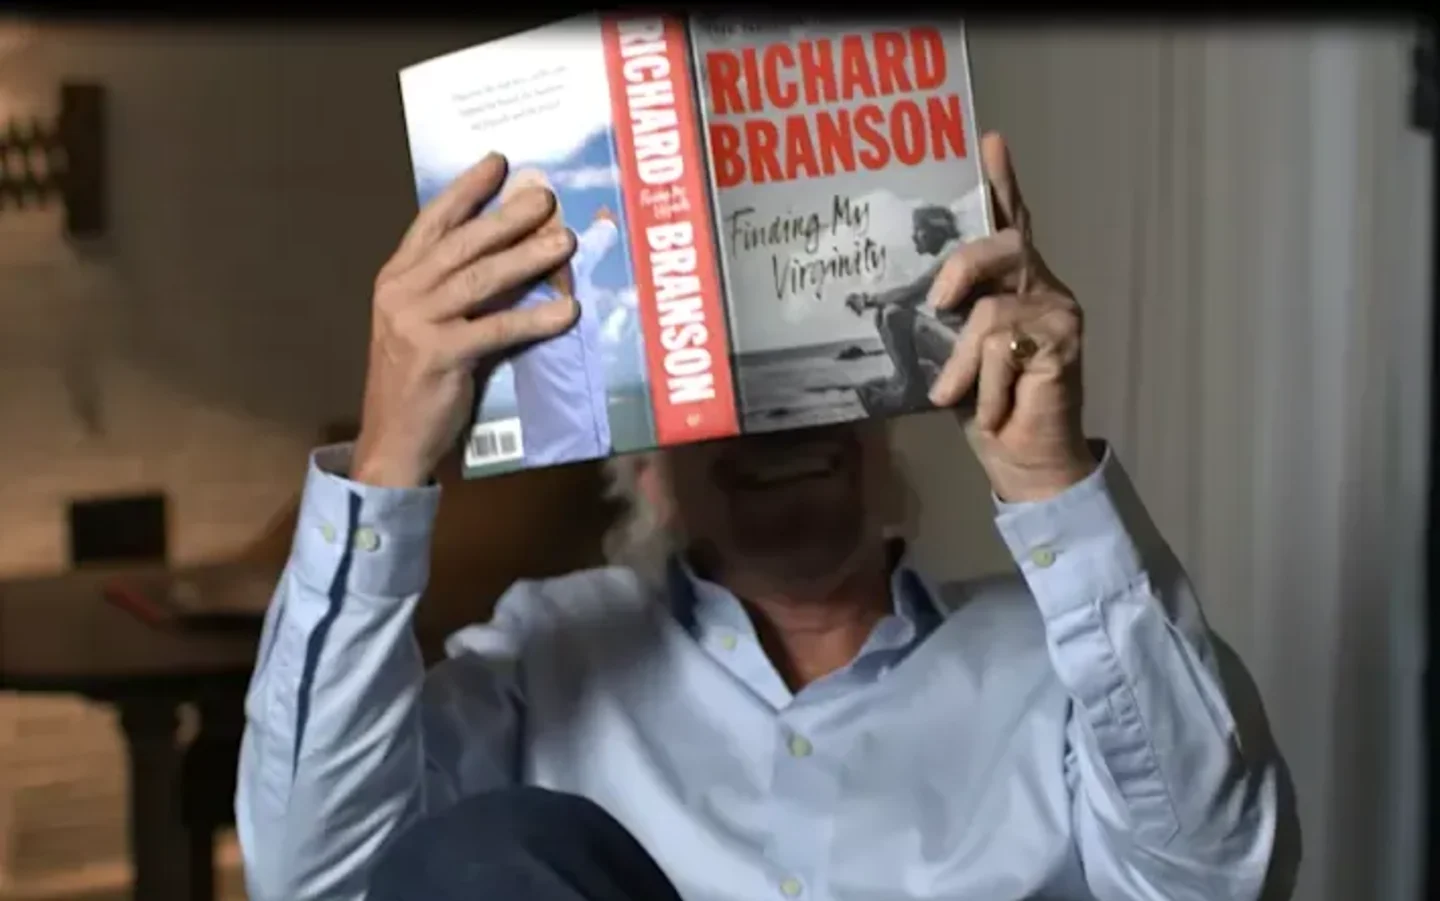 Richard Branson holds up his open auto-biography "Finding My Virginity"